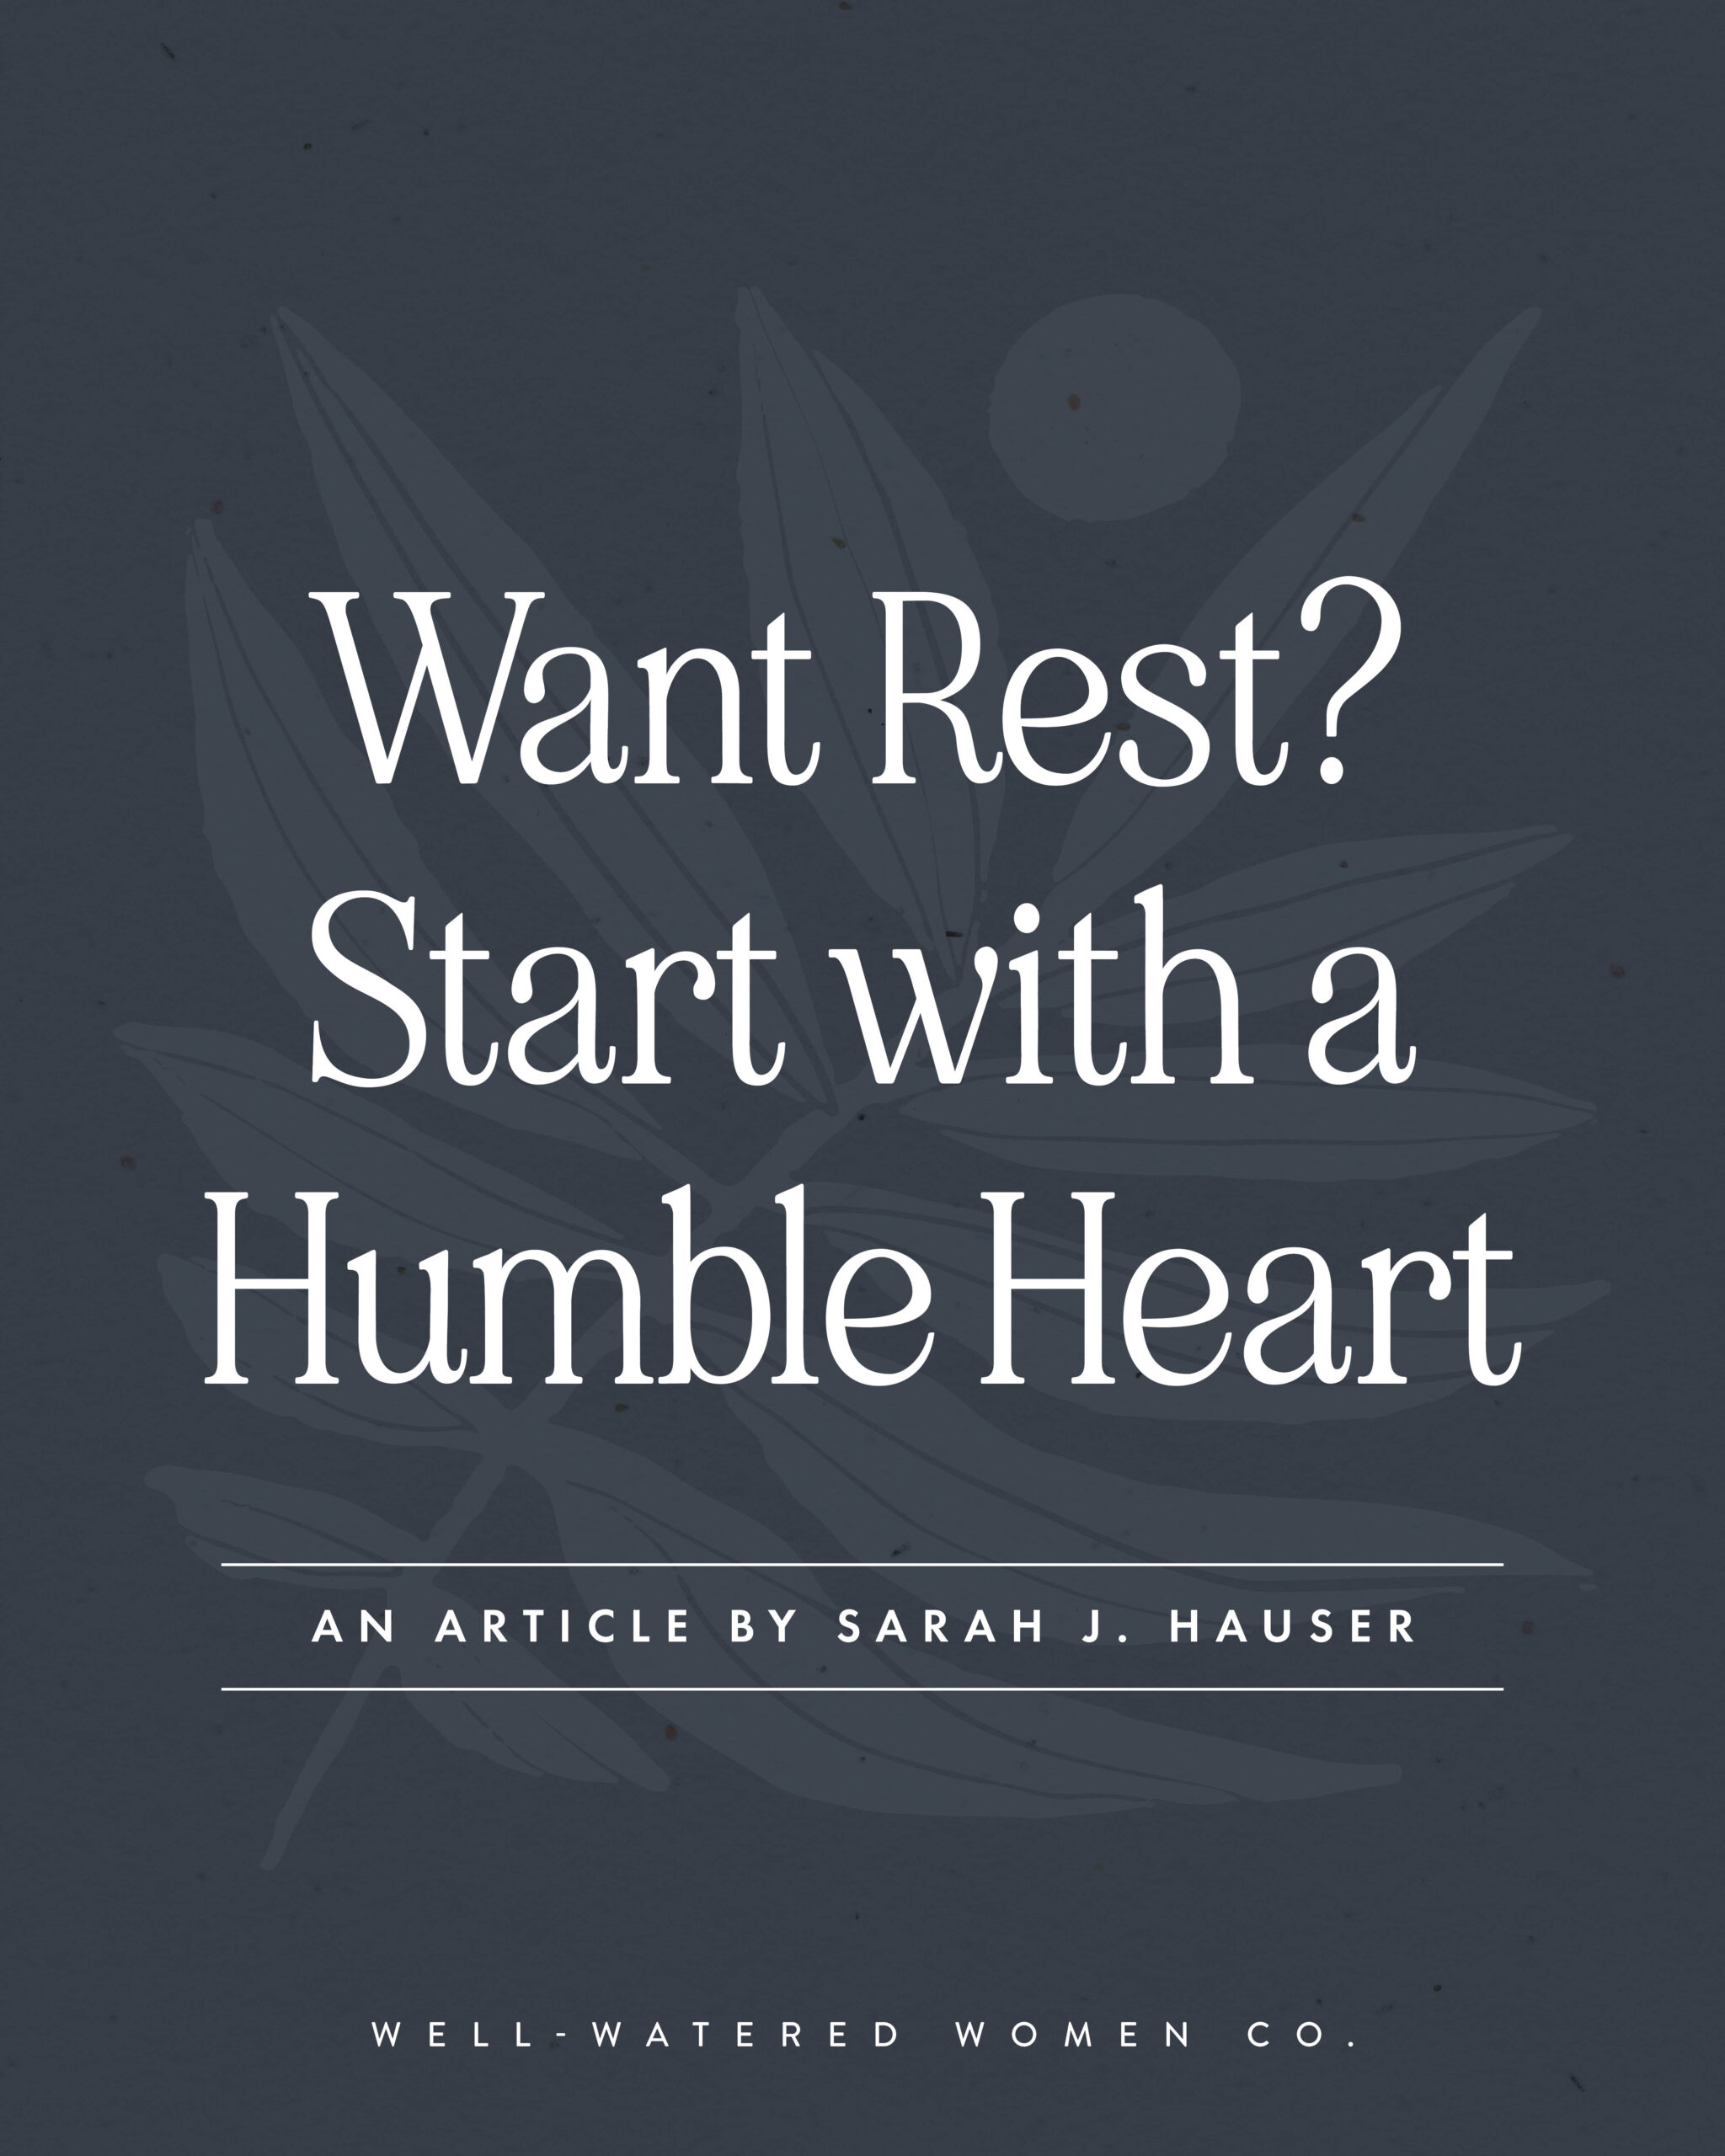 Want Rest? Start with a Humble Heart - an article from Well-Watered Women